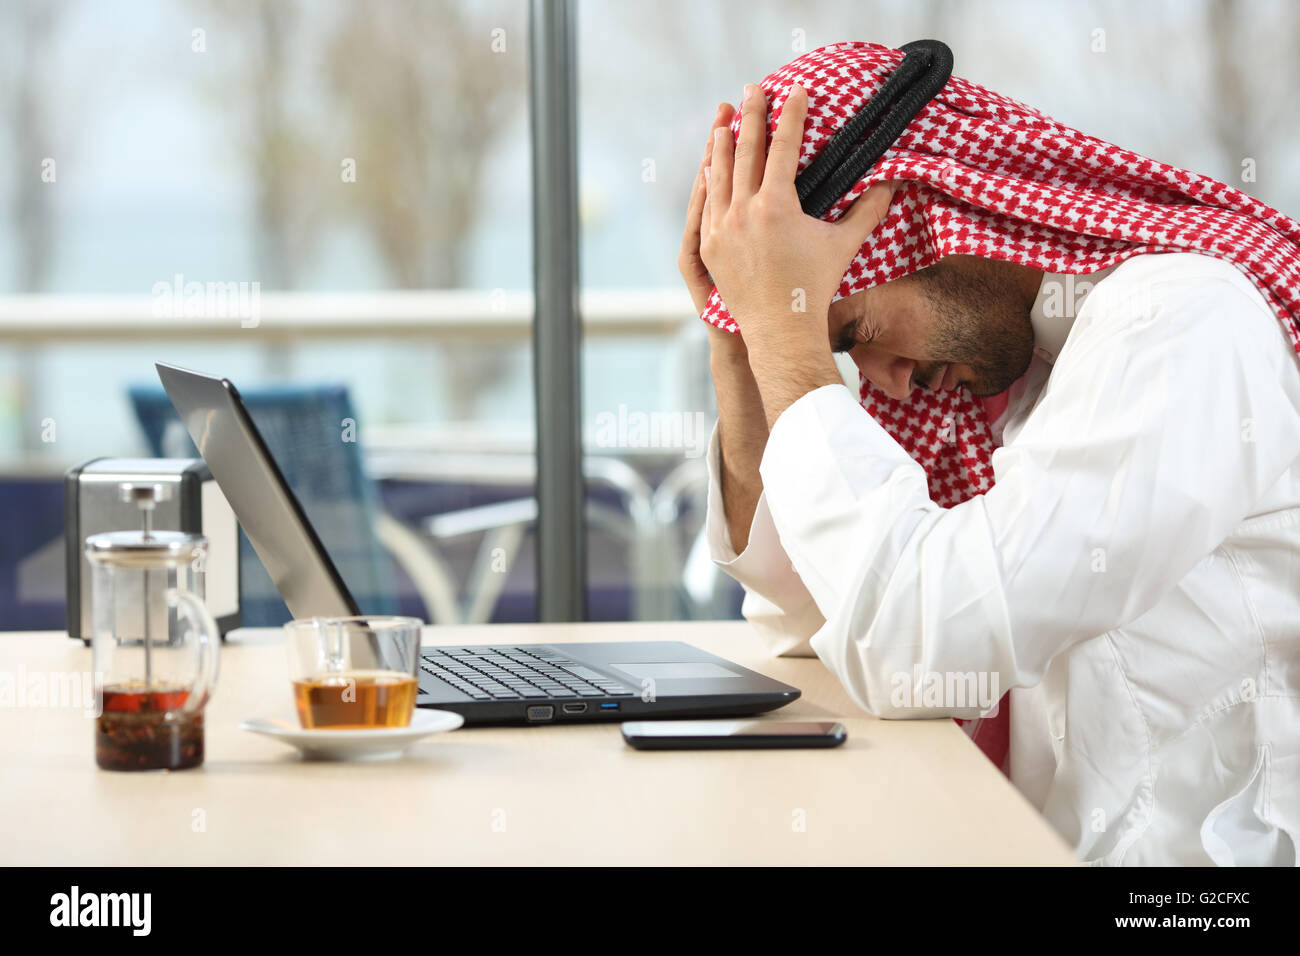 Profile of a desperate and alone arab saudi man with a laptop online in a coffee shop with a window in the background Stock Photo